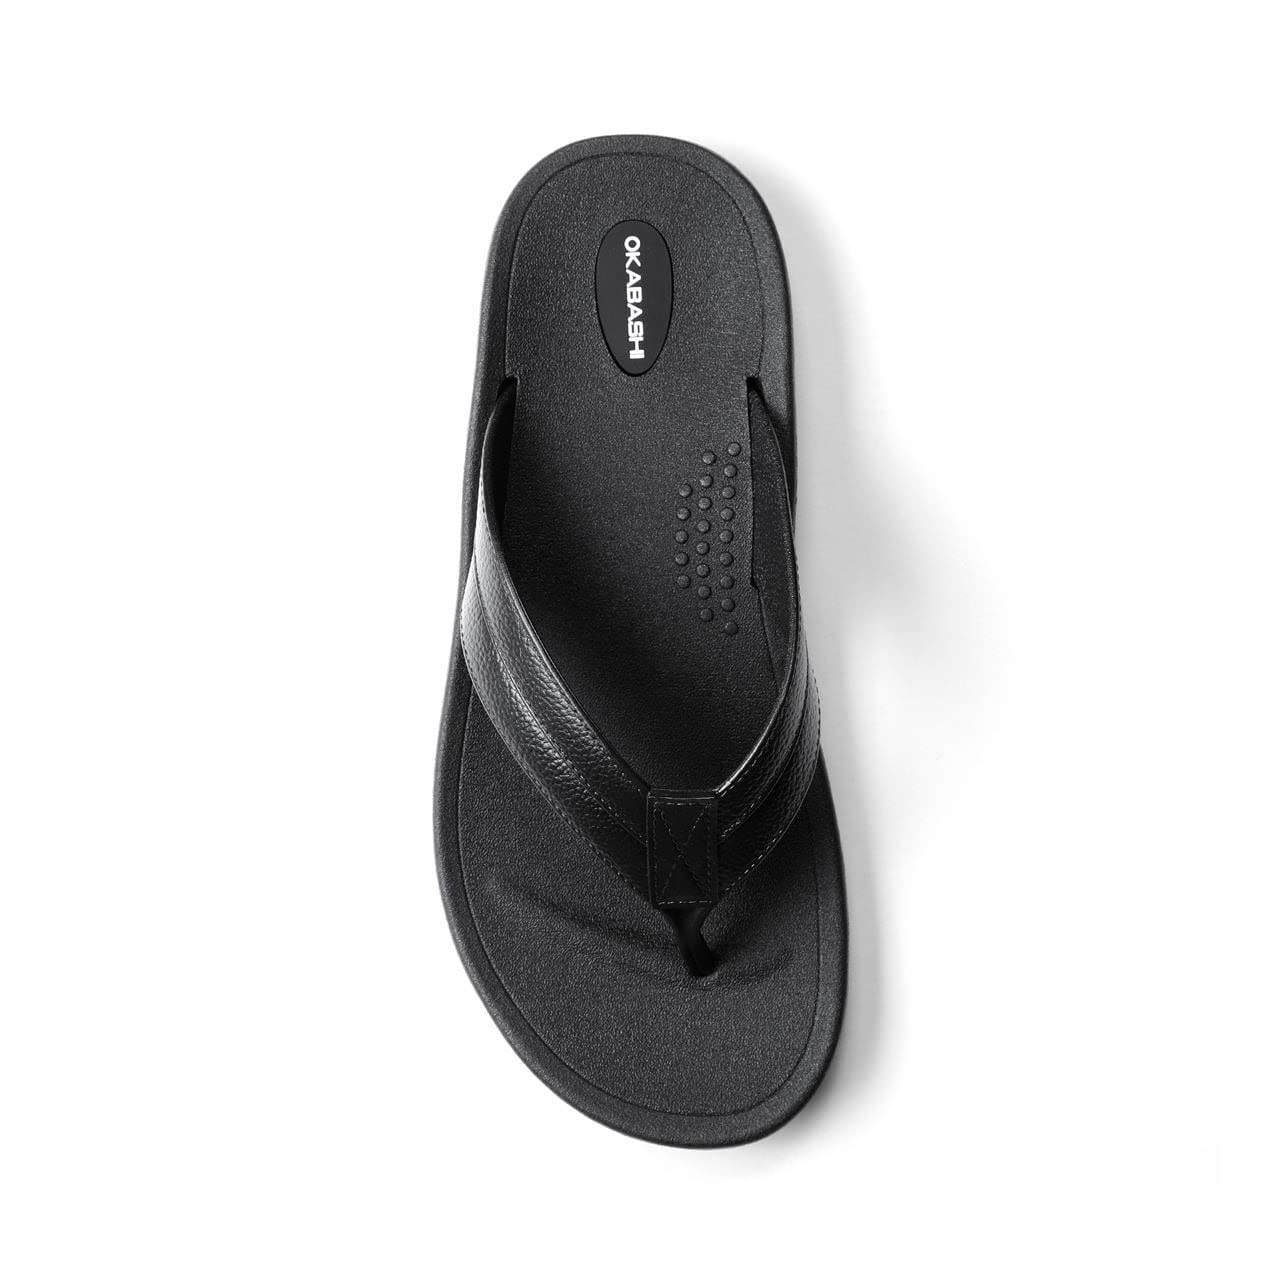 OKABASHI Men's Voyager Flip Flop (Black, 10) | Sculpted Footbed w/Nonslip Grip | Slip Resistant & Waterproof | Sustainably Made in the USA